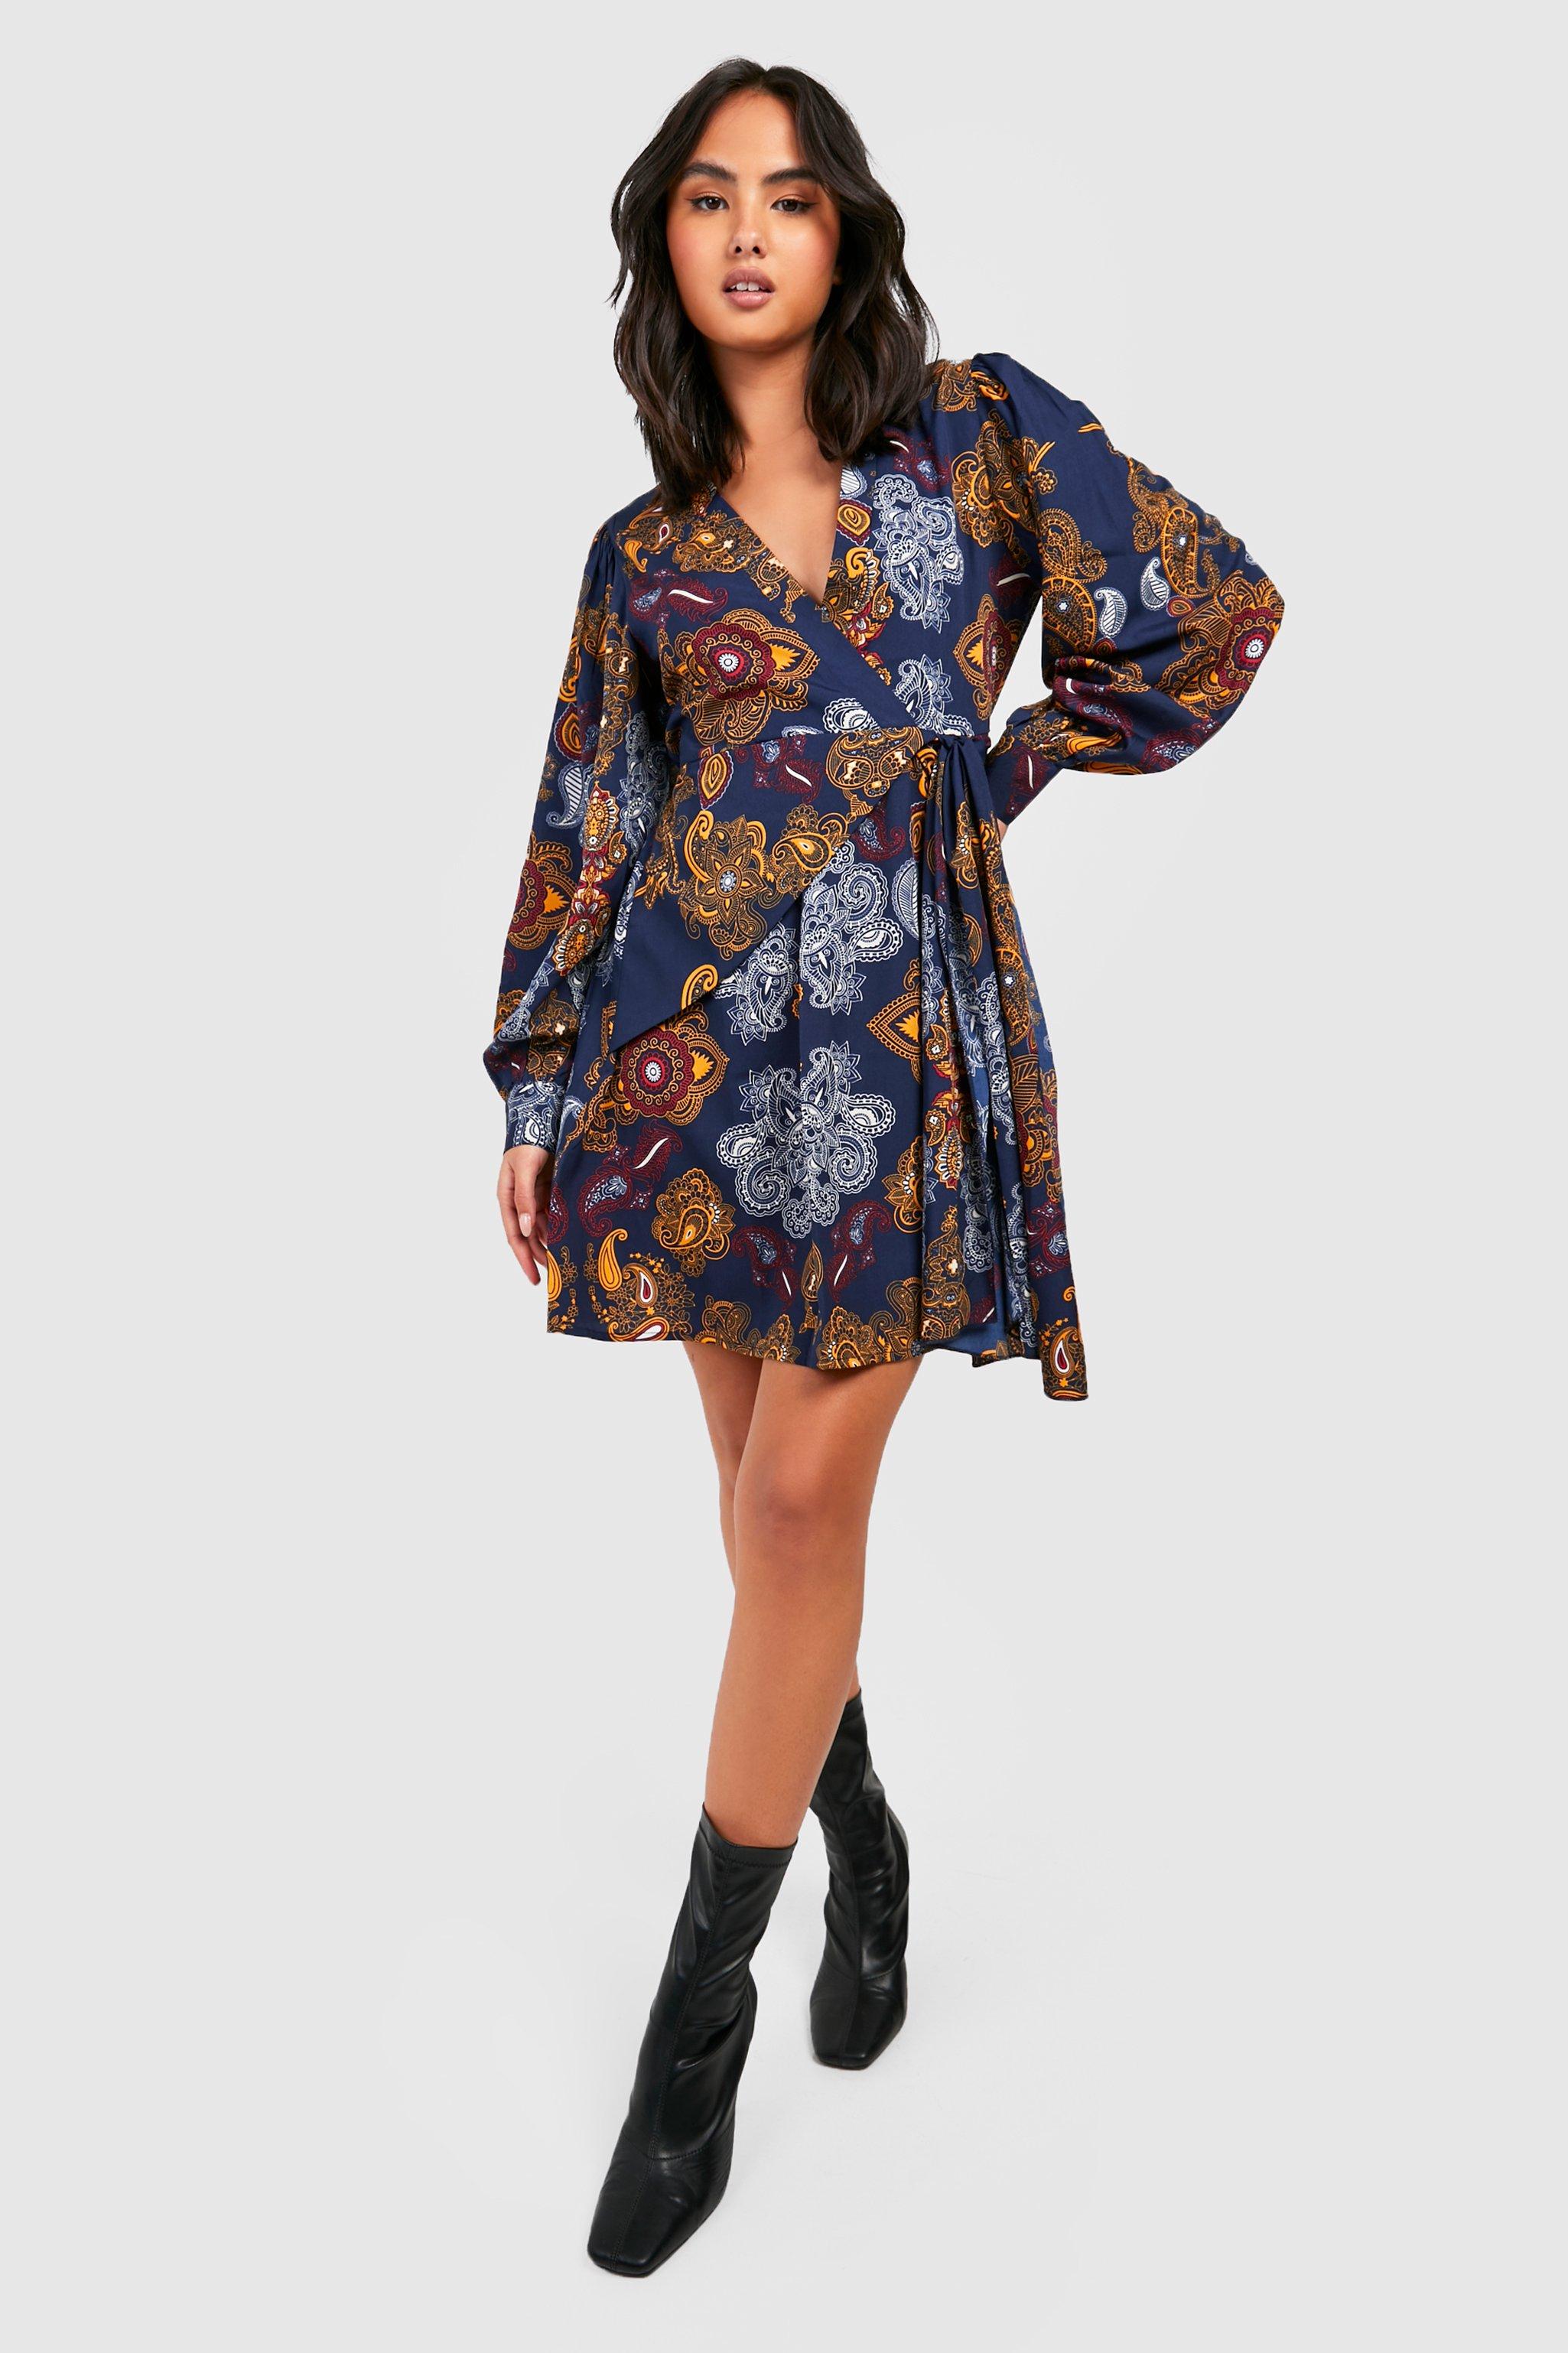 boohoo Women's The Printed Skater Dress|Size: 14|navy